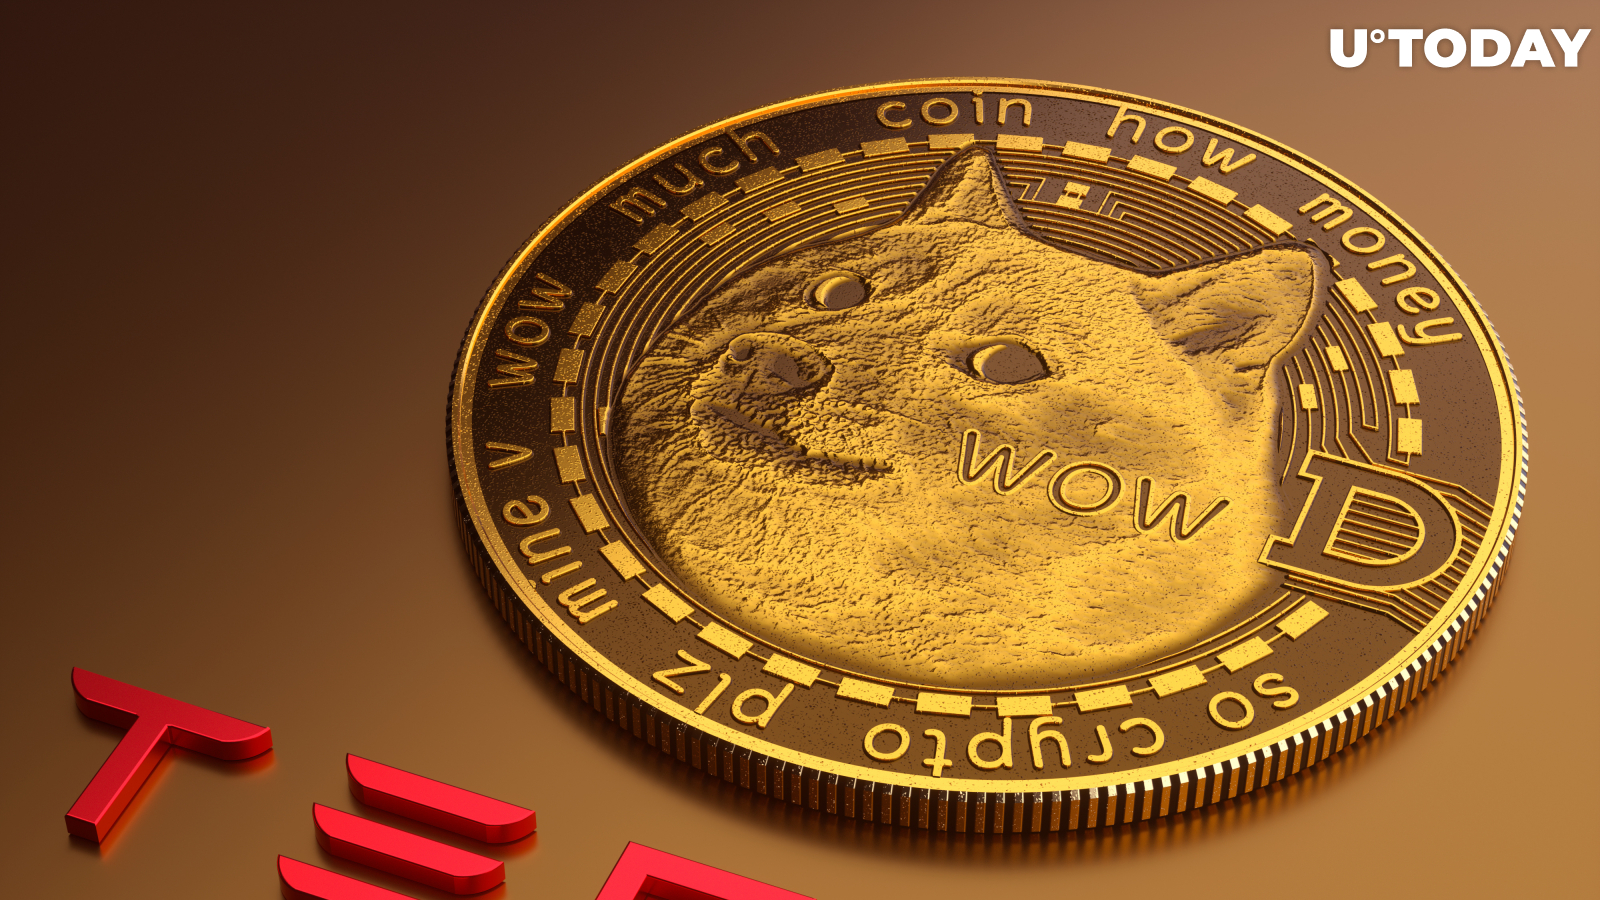 Dogecoin Price Soars as Tesla Starts Accepting DOGE for Some Products